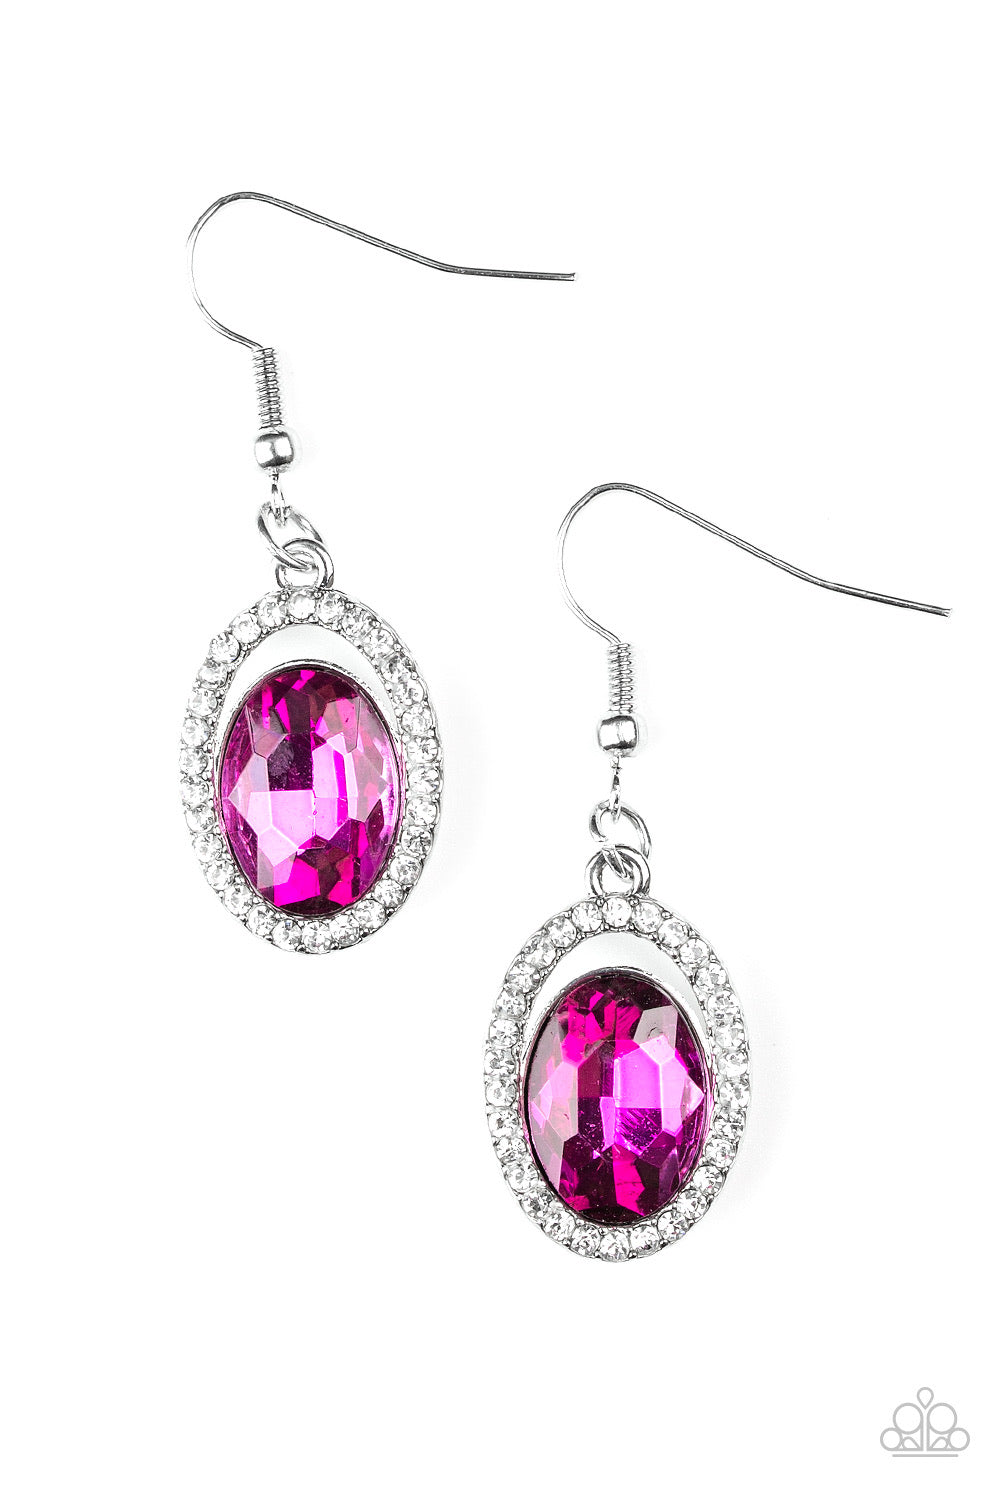 Paparazzi Accessories  - Imperial SHINE - ness -  #E280 Peg - Pink Earring